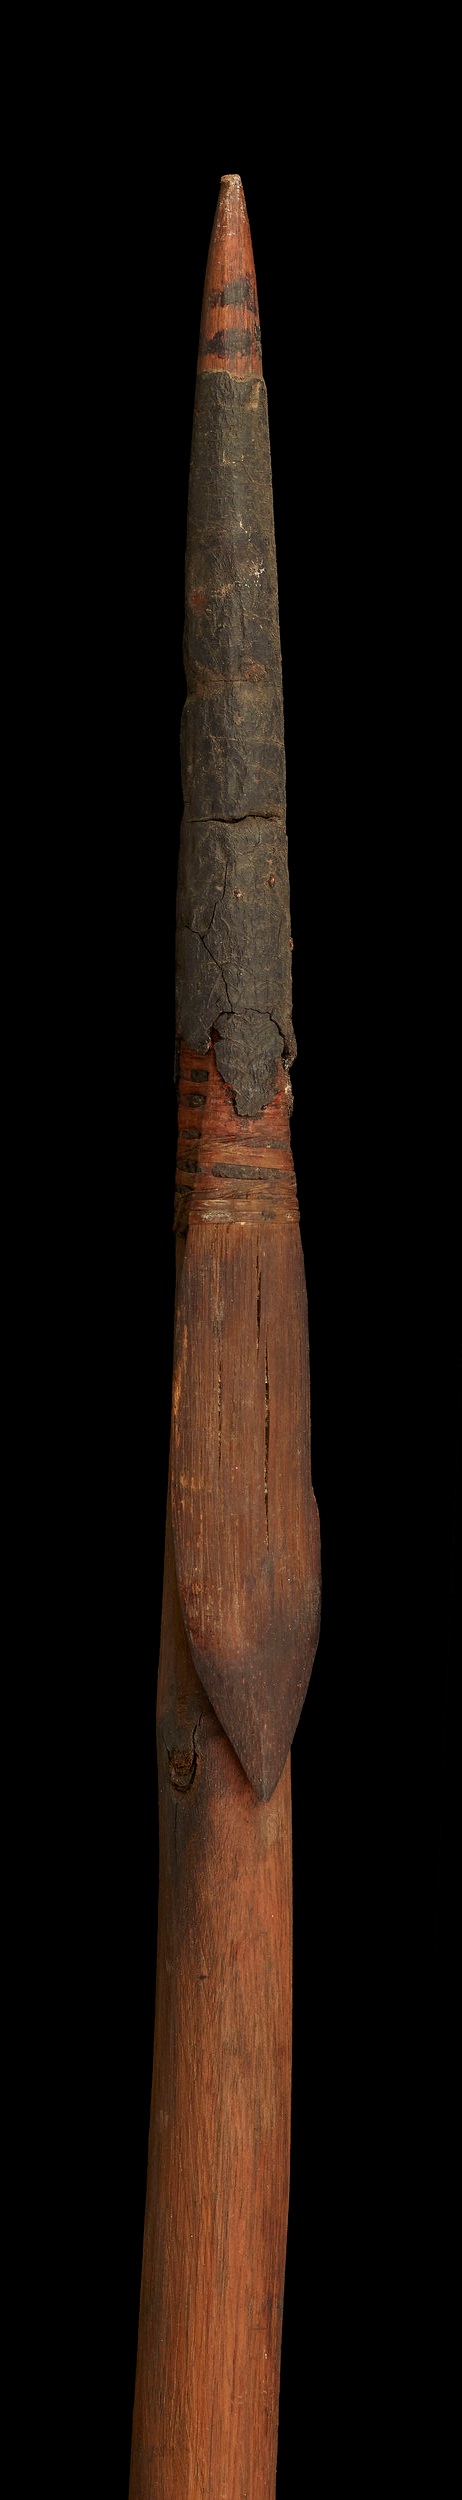 Spear, King George’s Sound, Albany c.1821